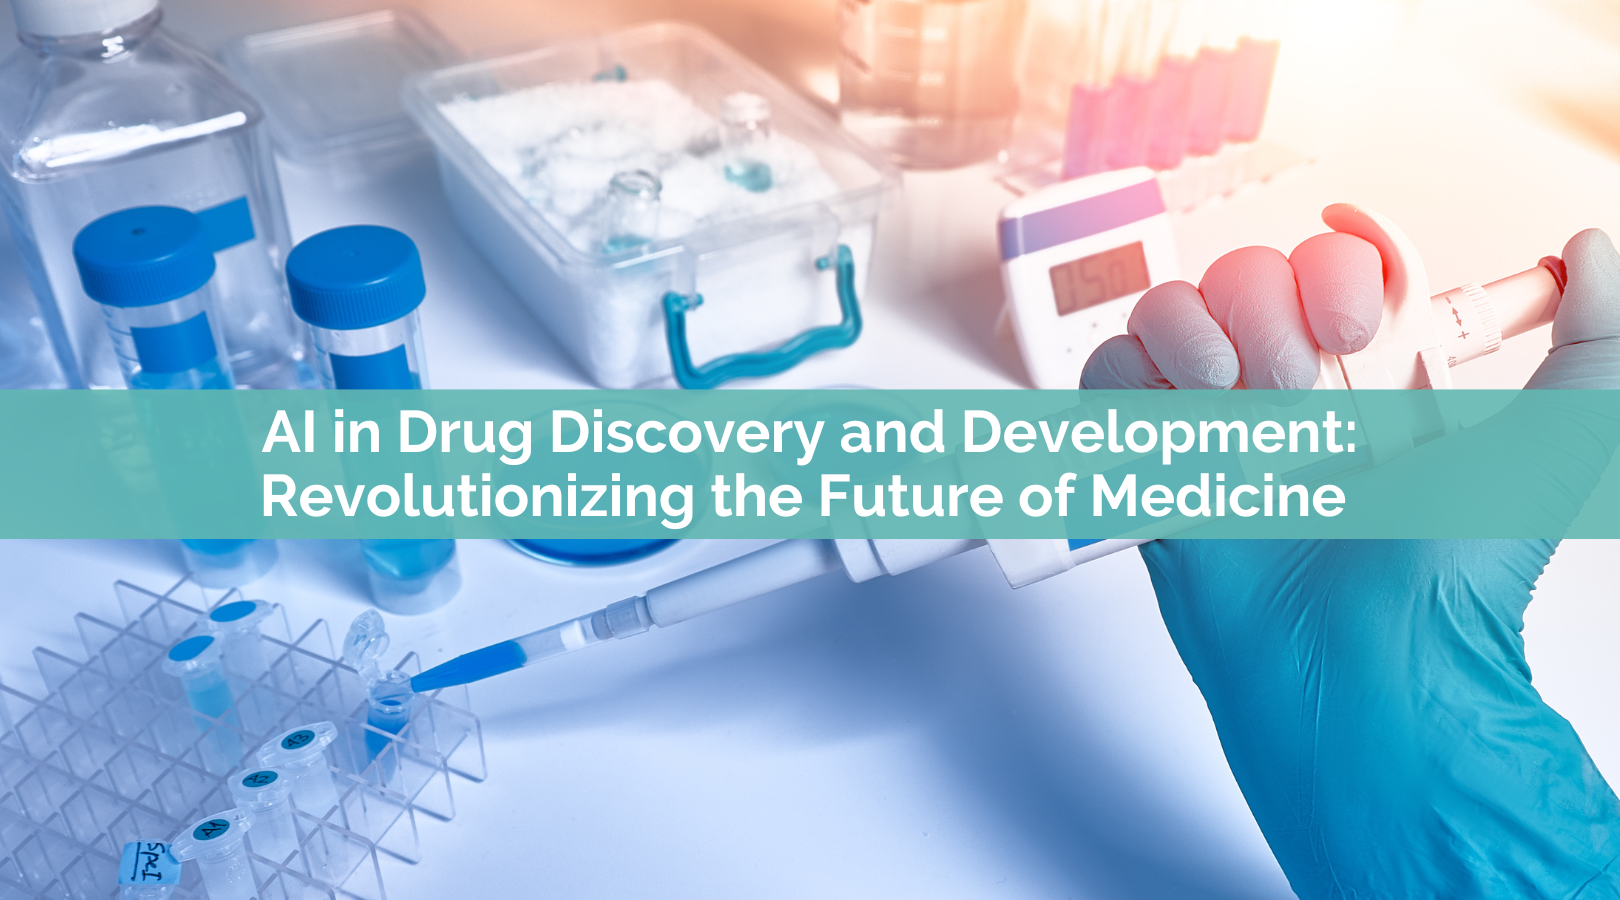 AI in Drug Discovery and Development: The Future of Medicine